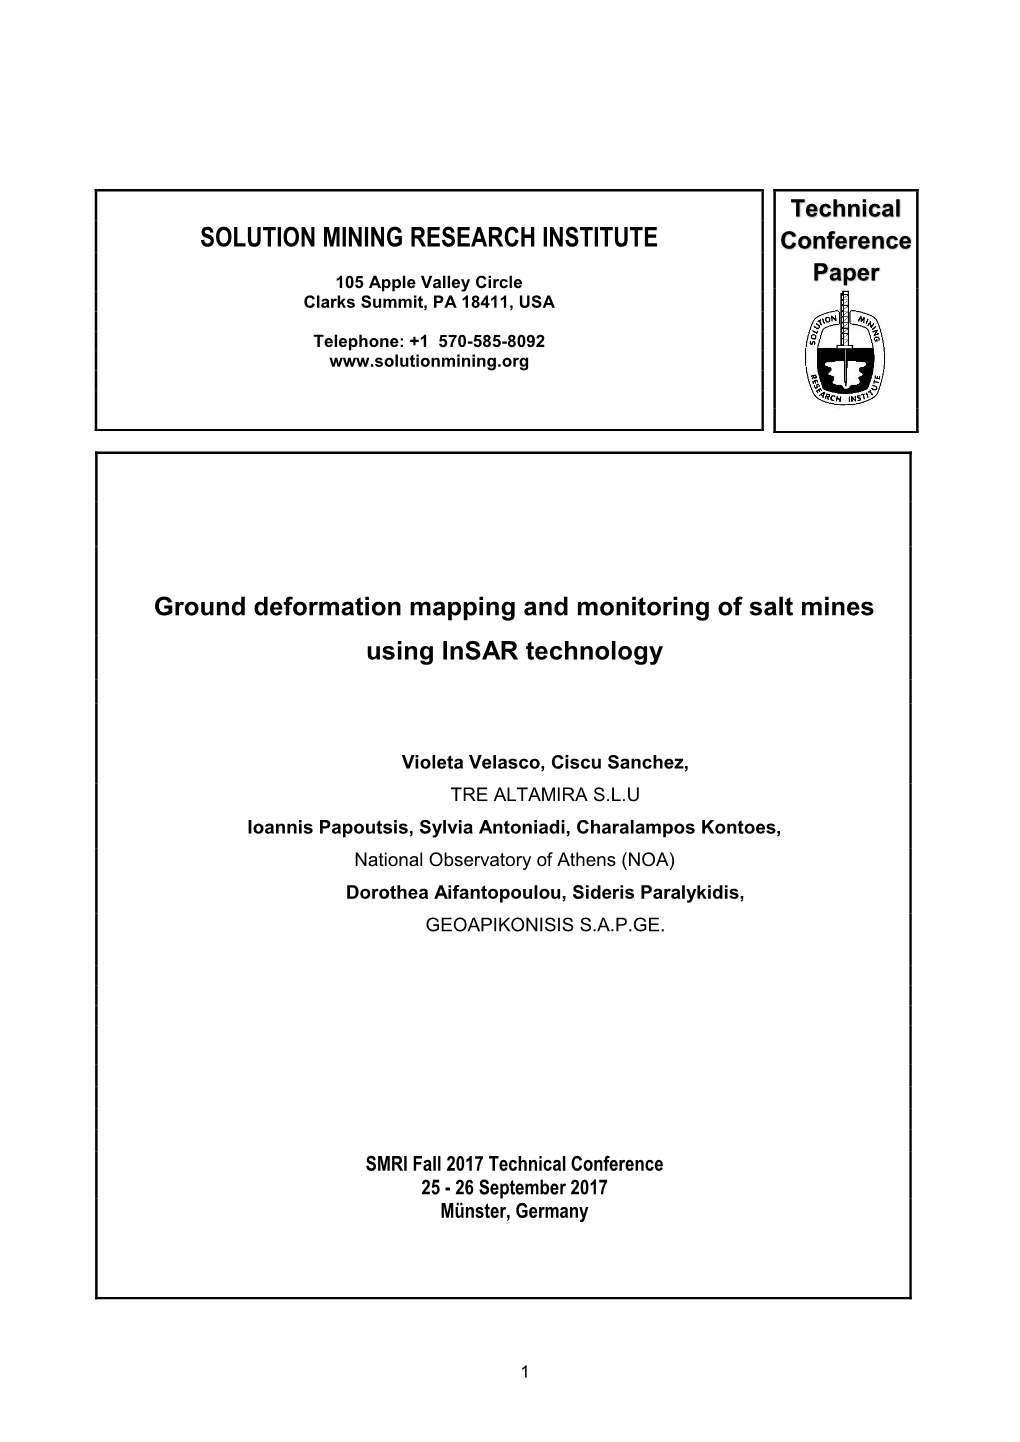 Ground Deformation Mapping and Monitoring of Salt Mines Using Insar Technology